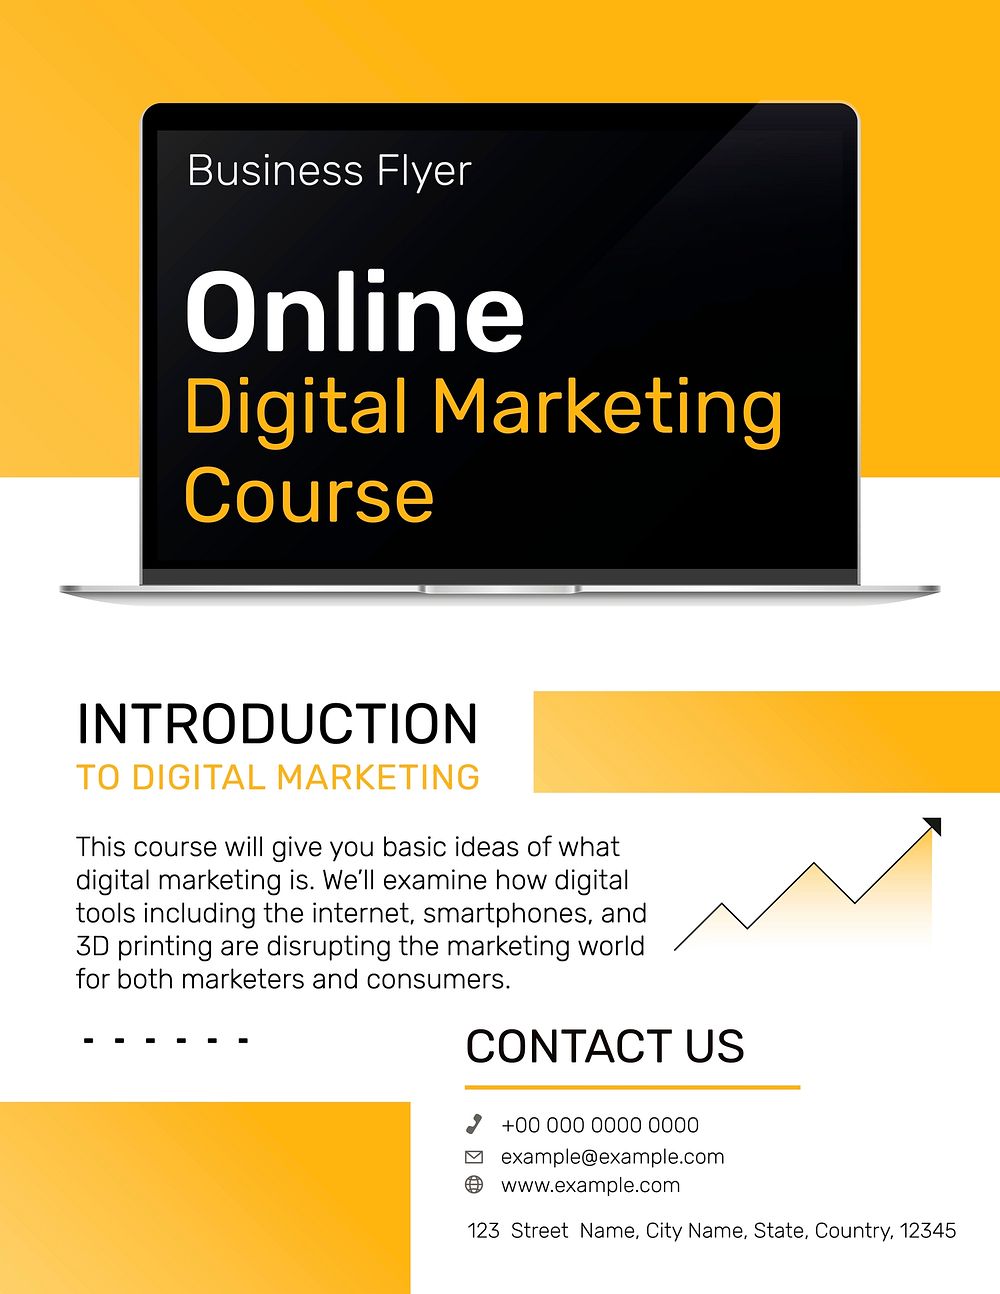 Digital marketing brochure template vector introduction for business